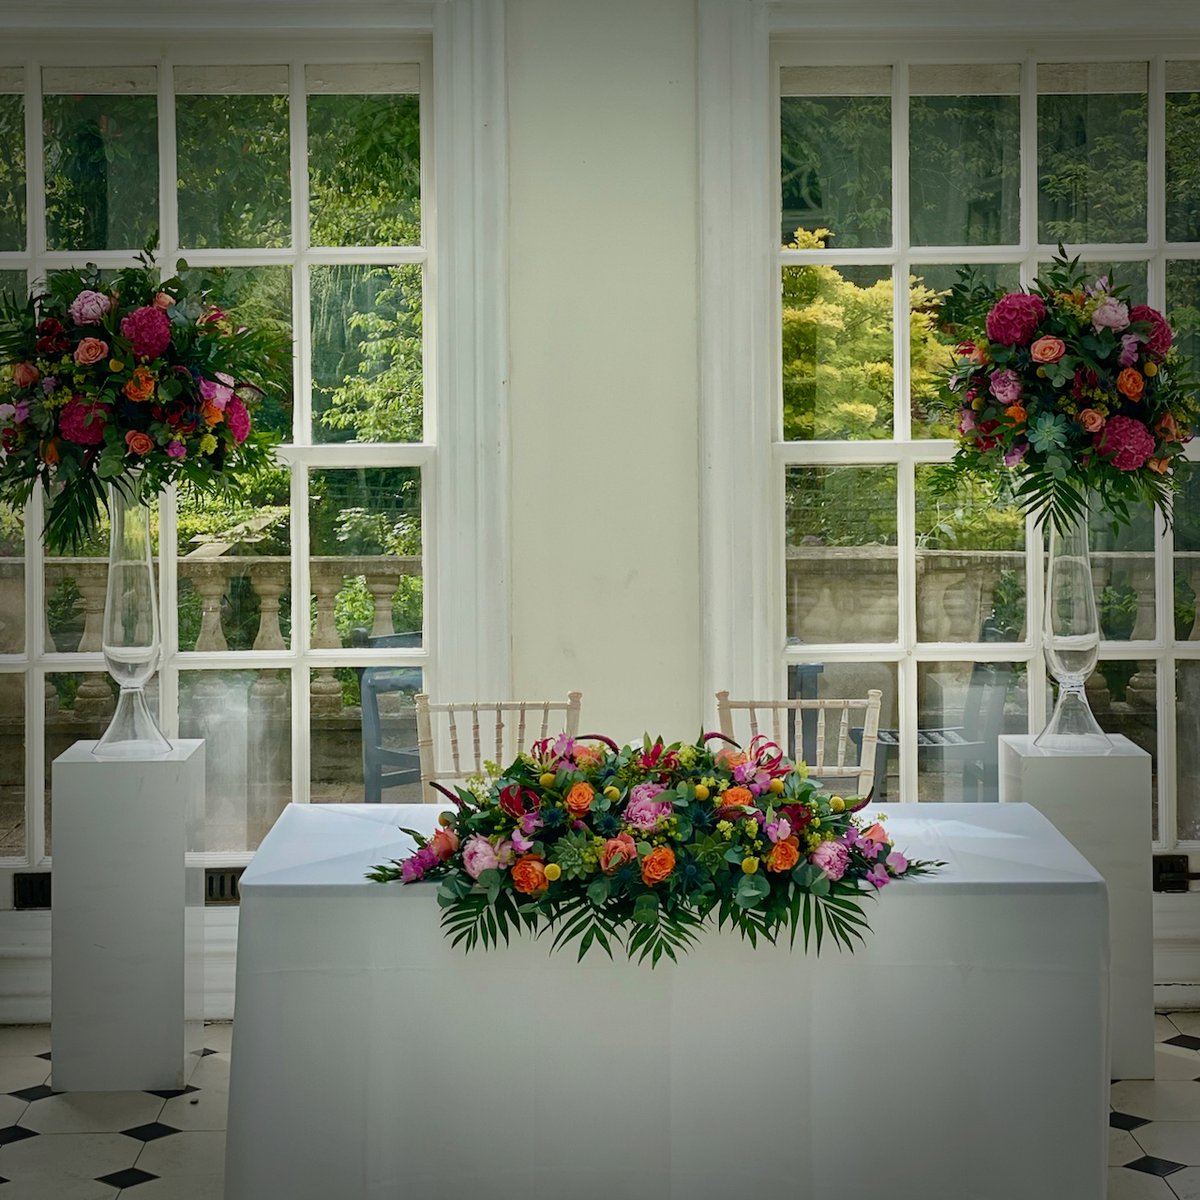 All ready for an intimate ceremony in the stunning orangery at Hunton Park Hotel ❤️
#HuntonParkHotel #WeddingCeremony #CeremonyFlowers #WeddingFlowers #WeddingFlorist #WeddingDayMemories #Hertfordshire #HemelHempstead #MaplesFlowers